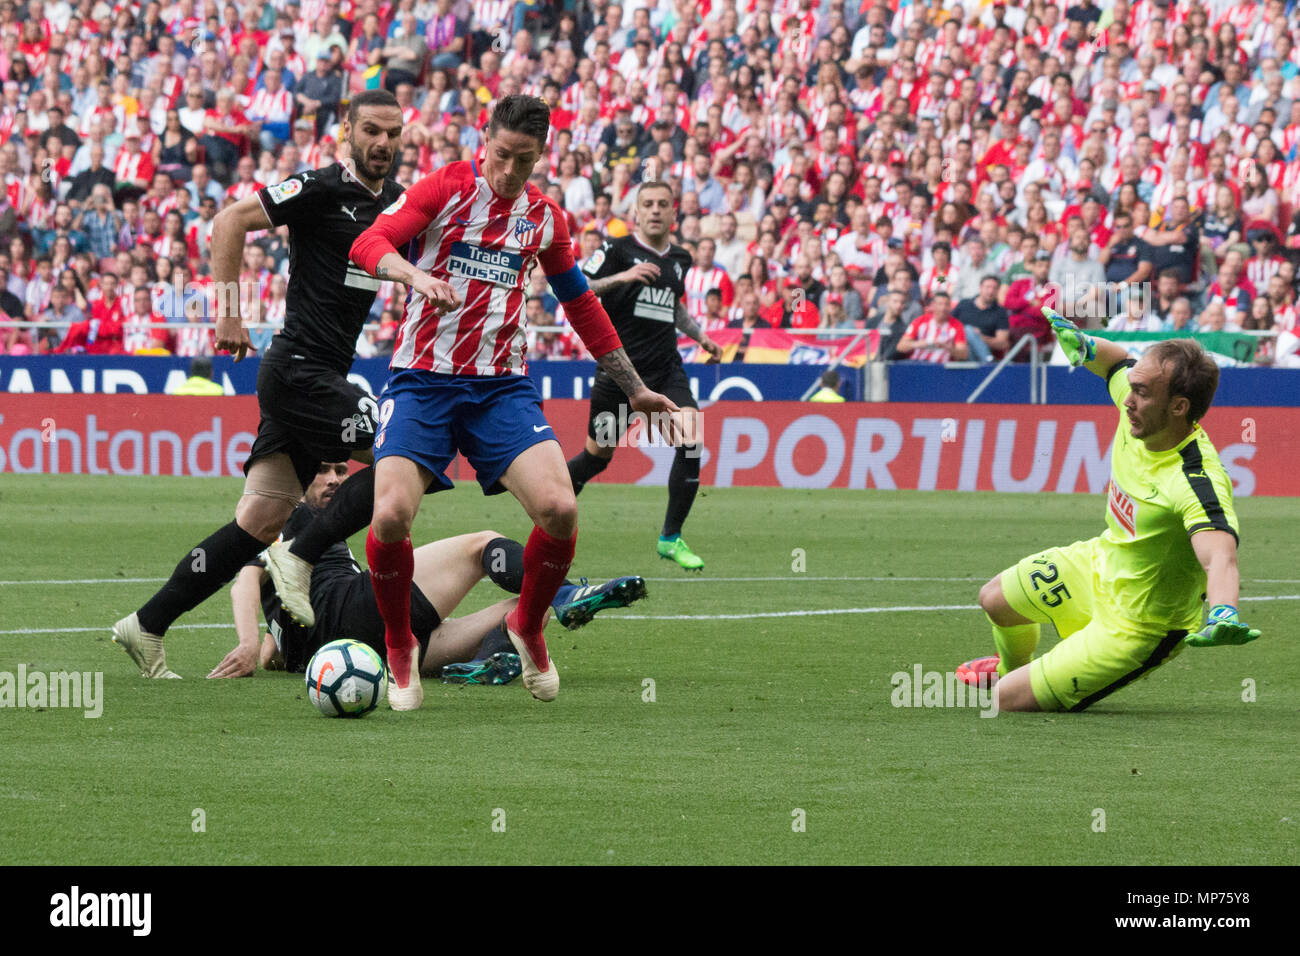 Madrid, Spain. 20th May 2018. Wanda Metropolitano stadium. Madrid. Spain. More than 68.000 people comes to see the 38th seasson of La Liga and the retire of Fernando Torres Idol of the club. The match confront Atletico de Madrid v Eibar S.D. In the image the second goal of Fernando Torres. Credit: Jorge Gonzalez /Alamy Live News/Alamy Live News Stock Photo